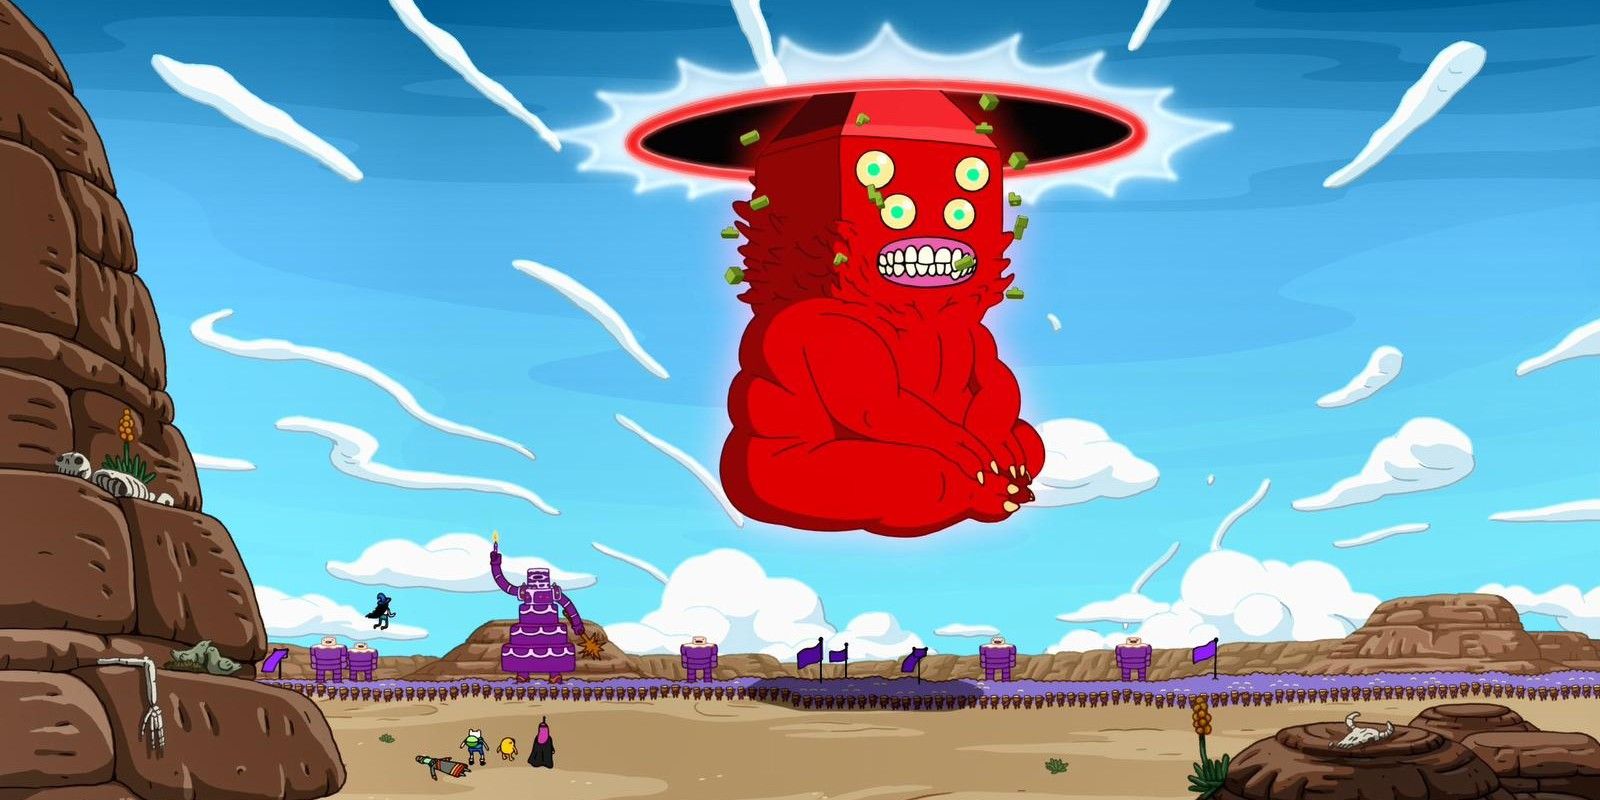 A giant metamorphisized Glob attempts to destroy Ooo in Adventure Time